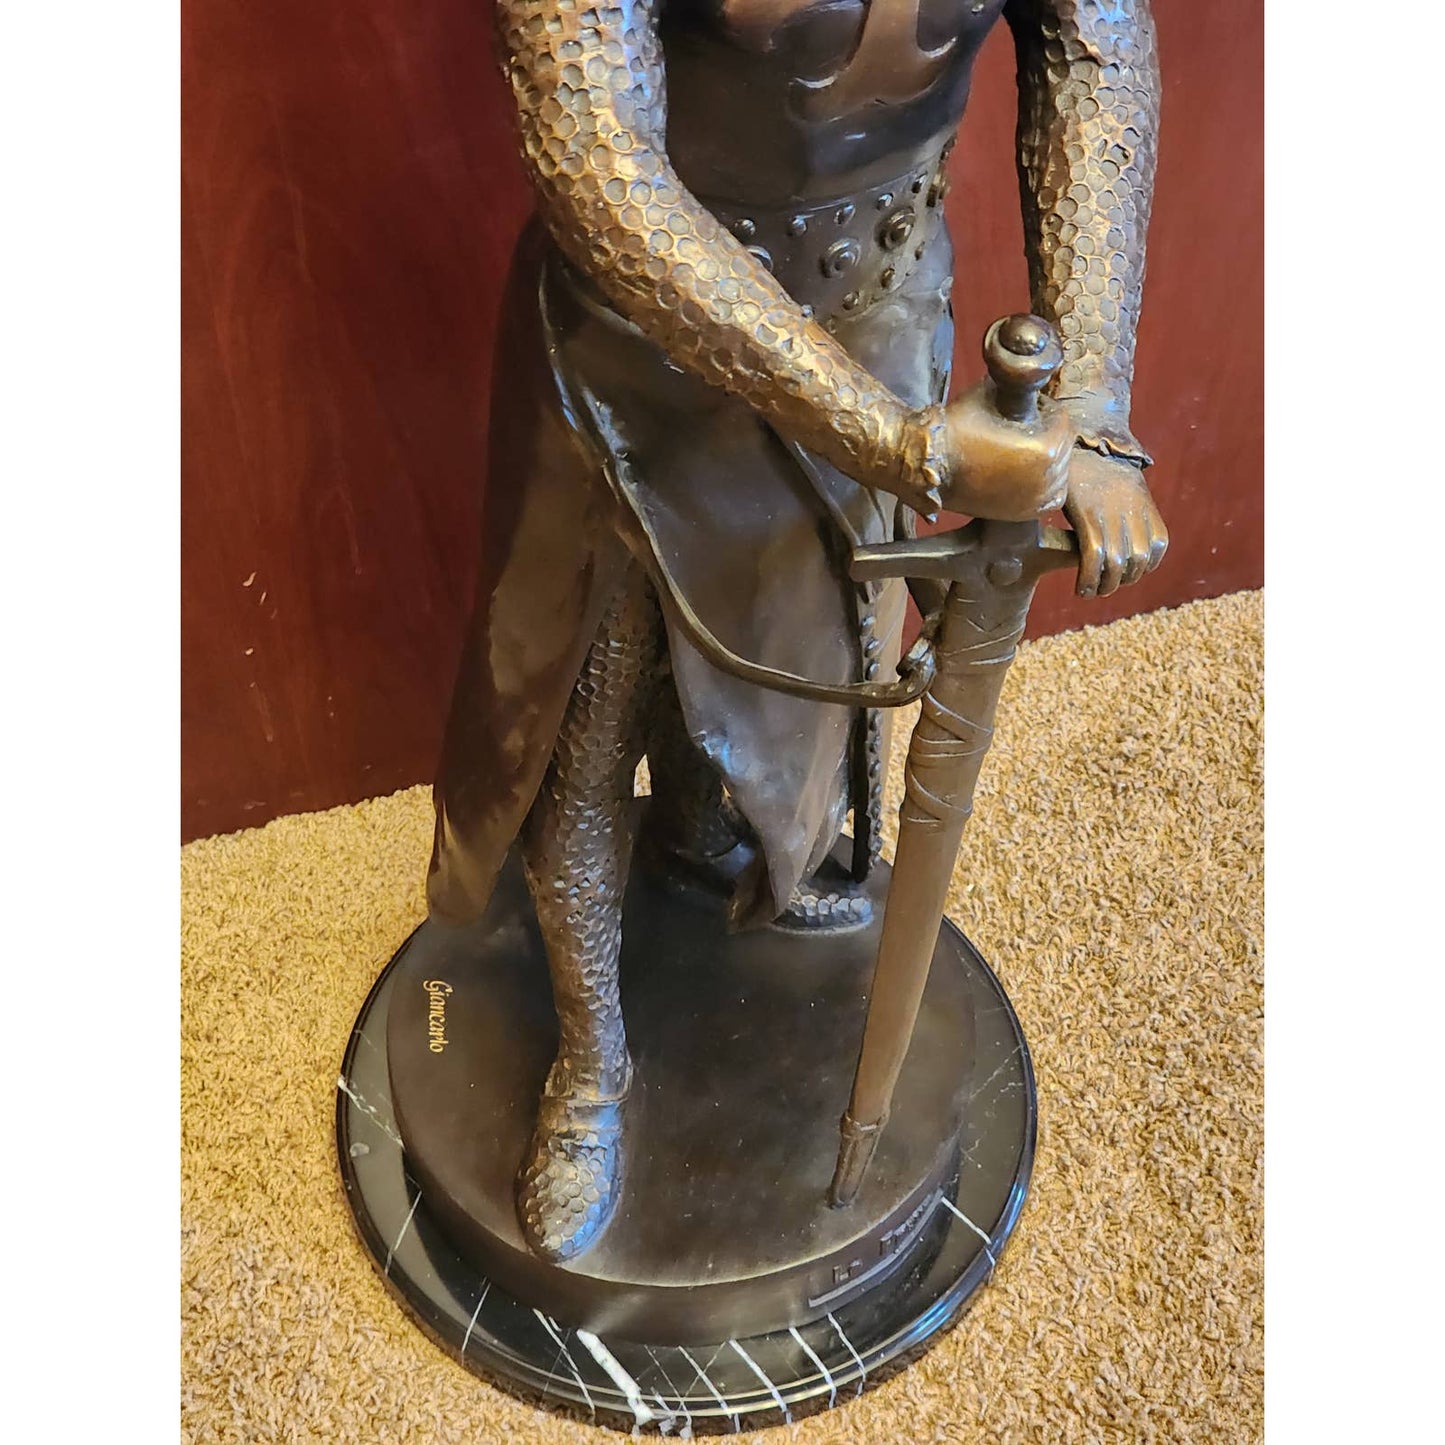 Knights Templar Crusader Bronze Sculpture Signed Giancarlo Le Preur Medieval 34"